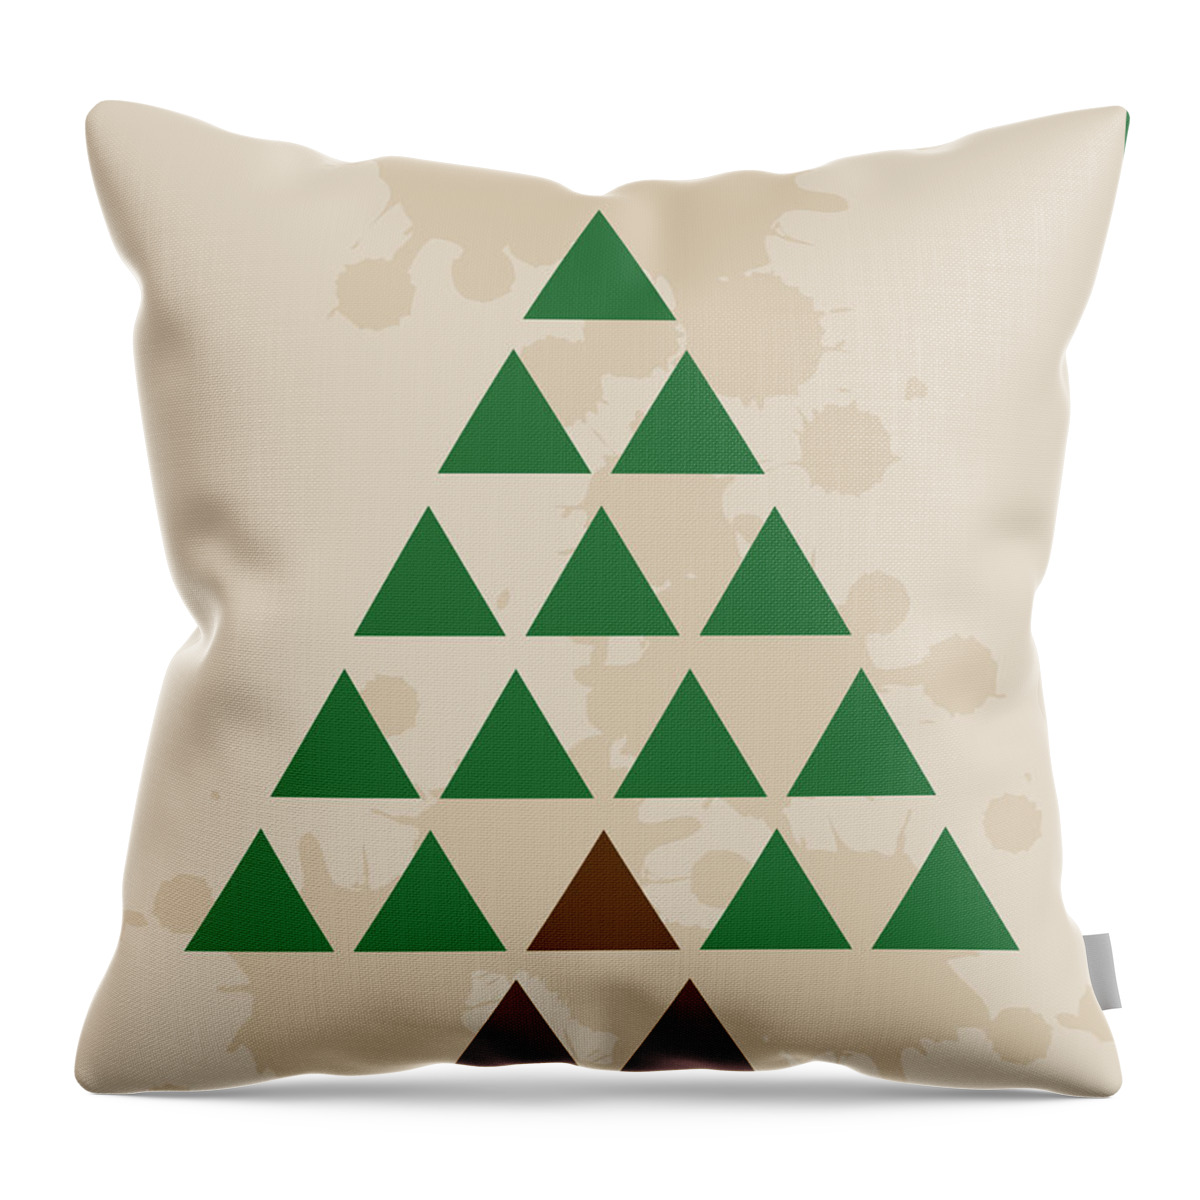 Triangles Throw Pillow featuring the digital art Triangle Tree by K Bradley Washburn